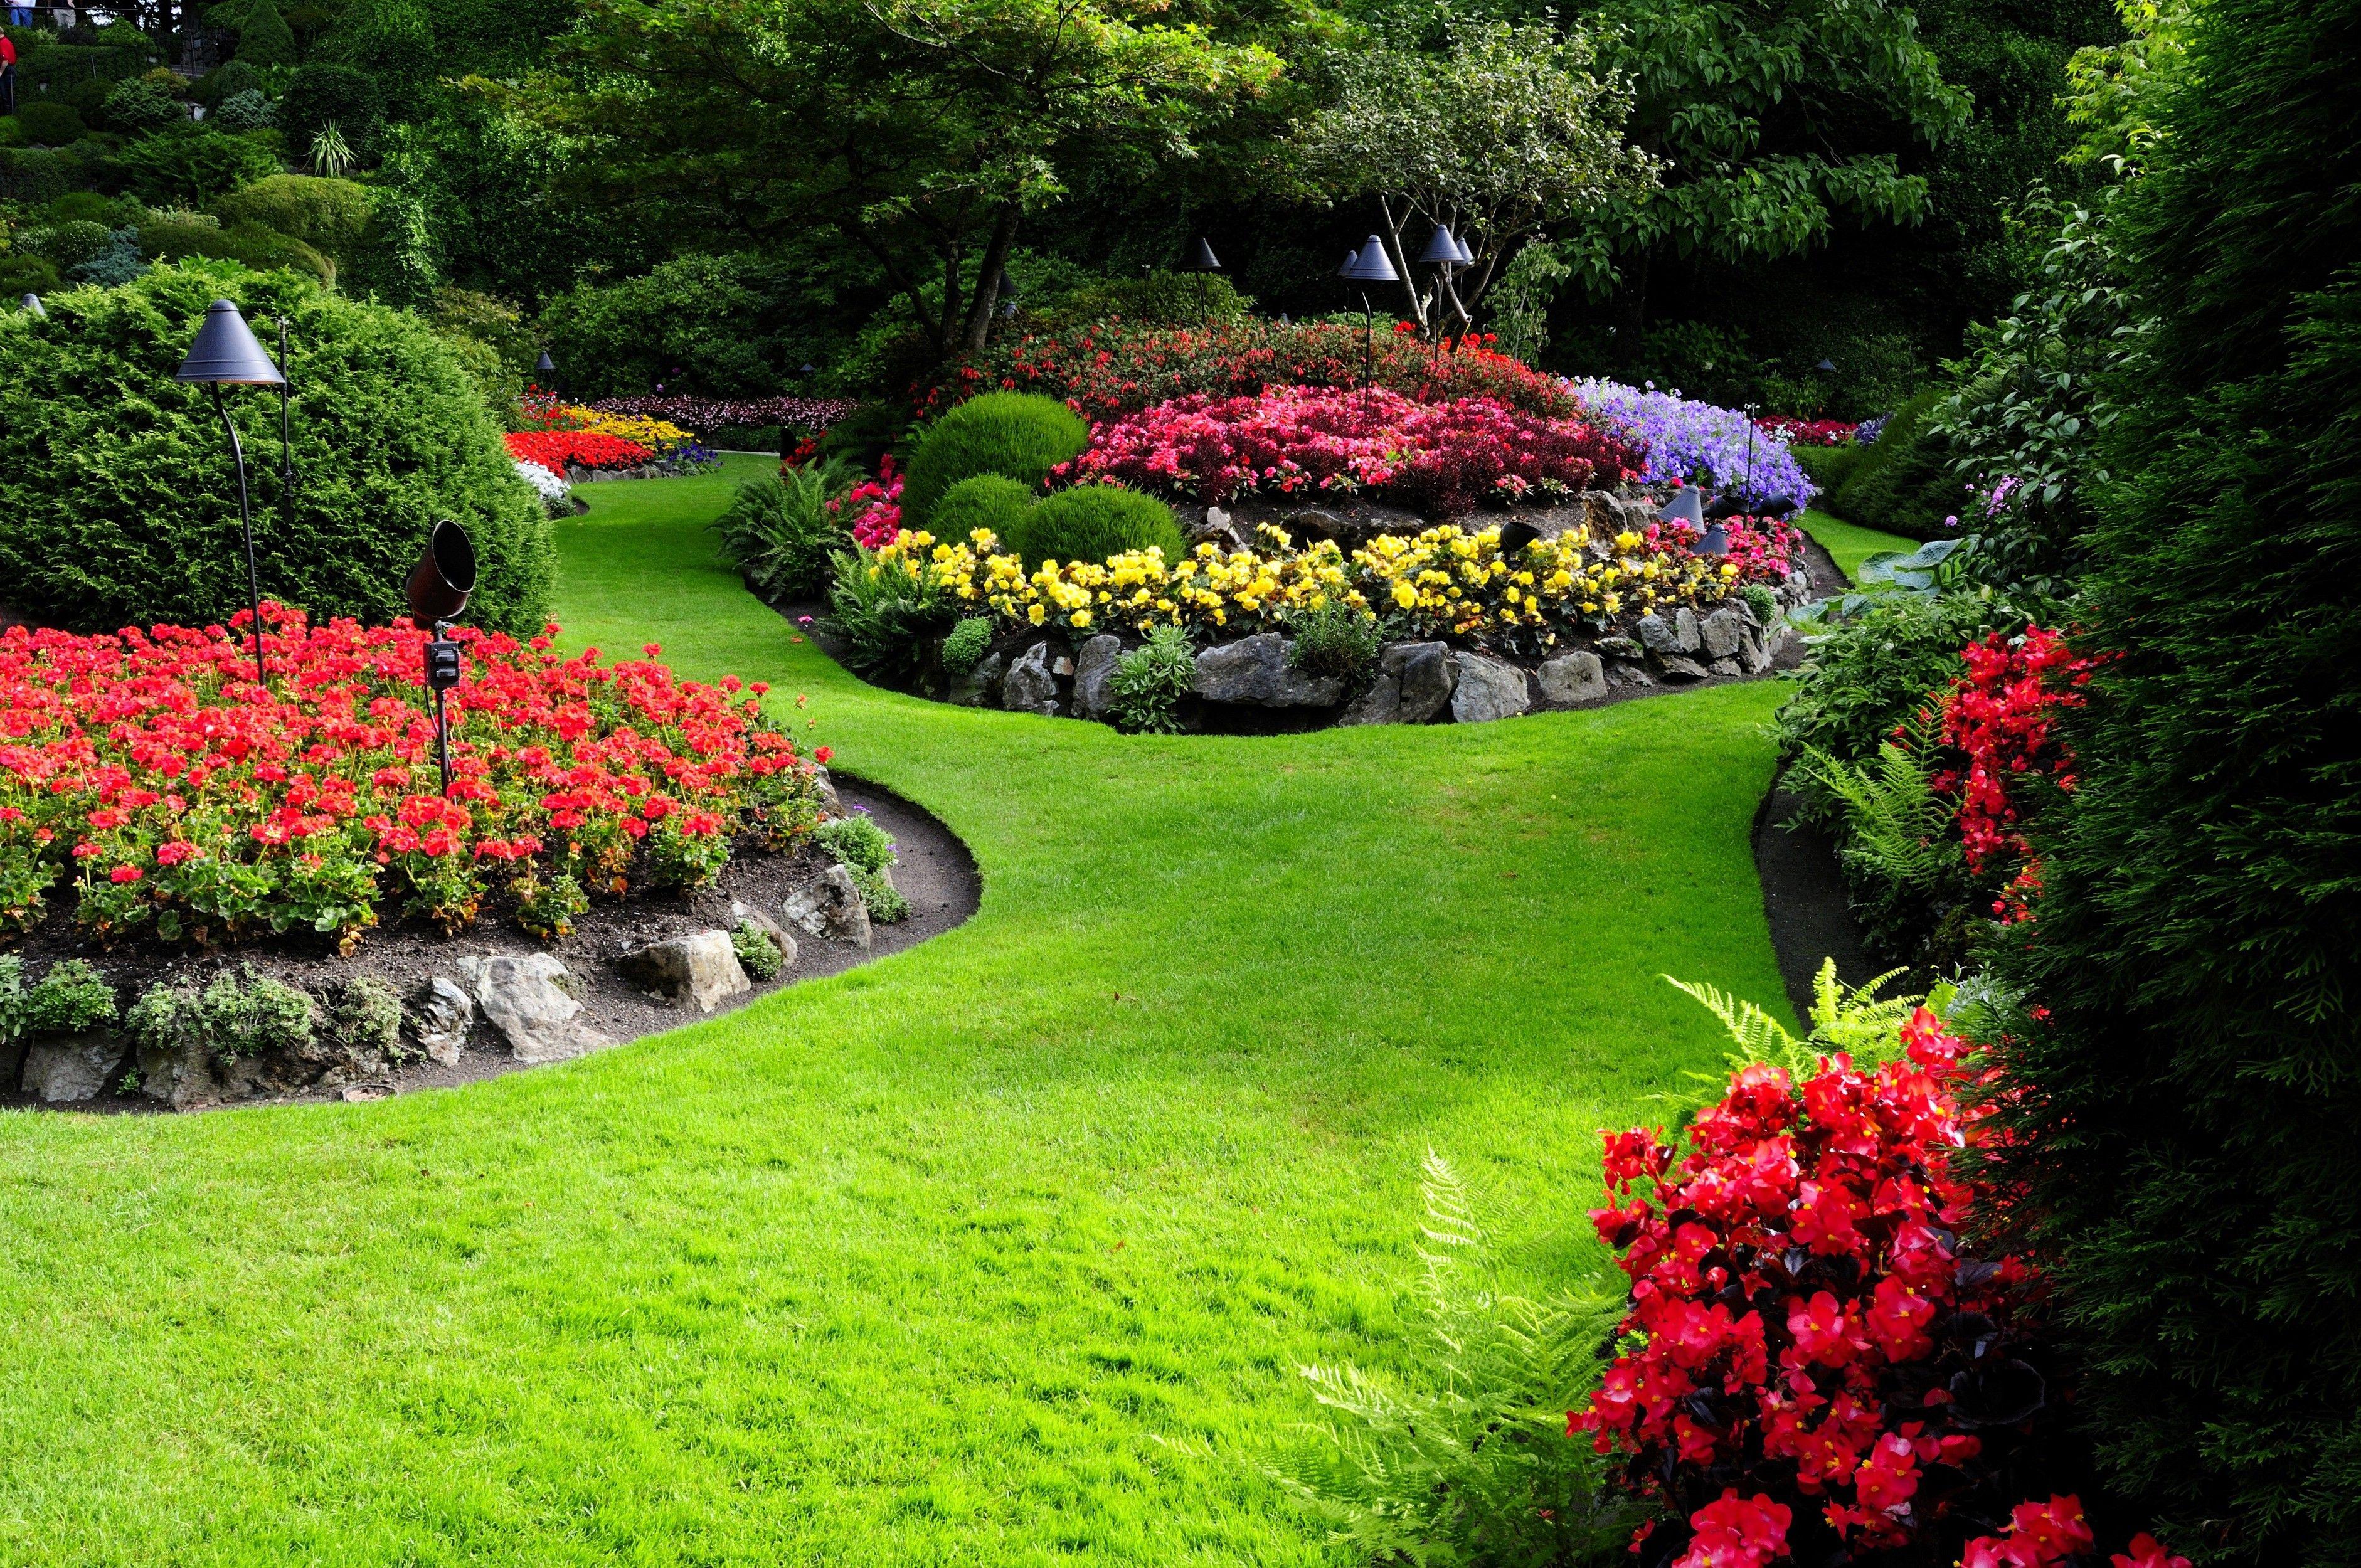 Colourful Flower Garden Wallpaper and Background Stock Image  Image of  colorful garden 220873407